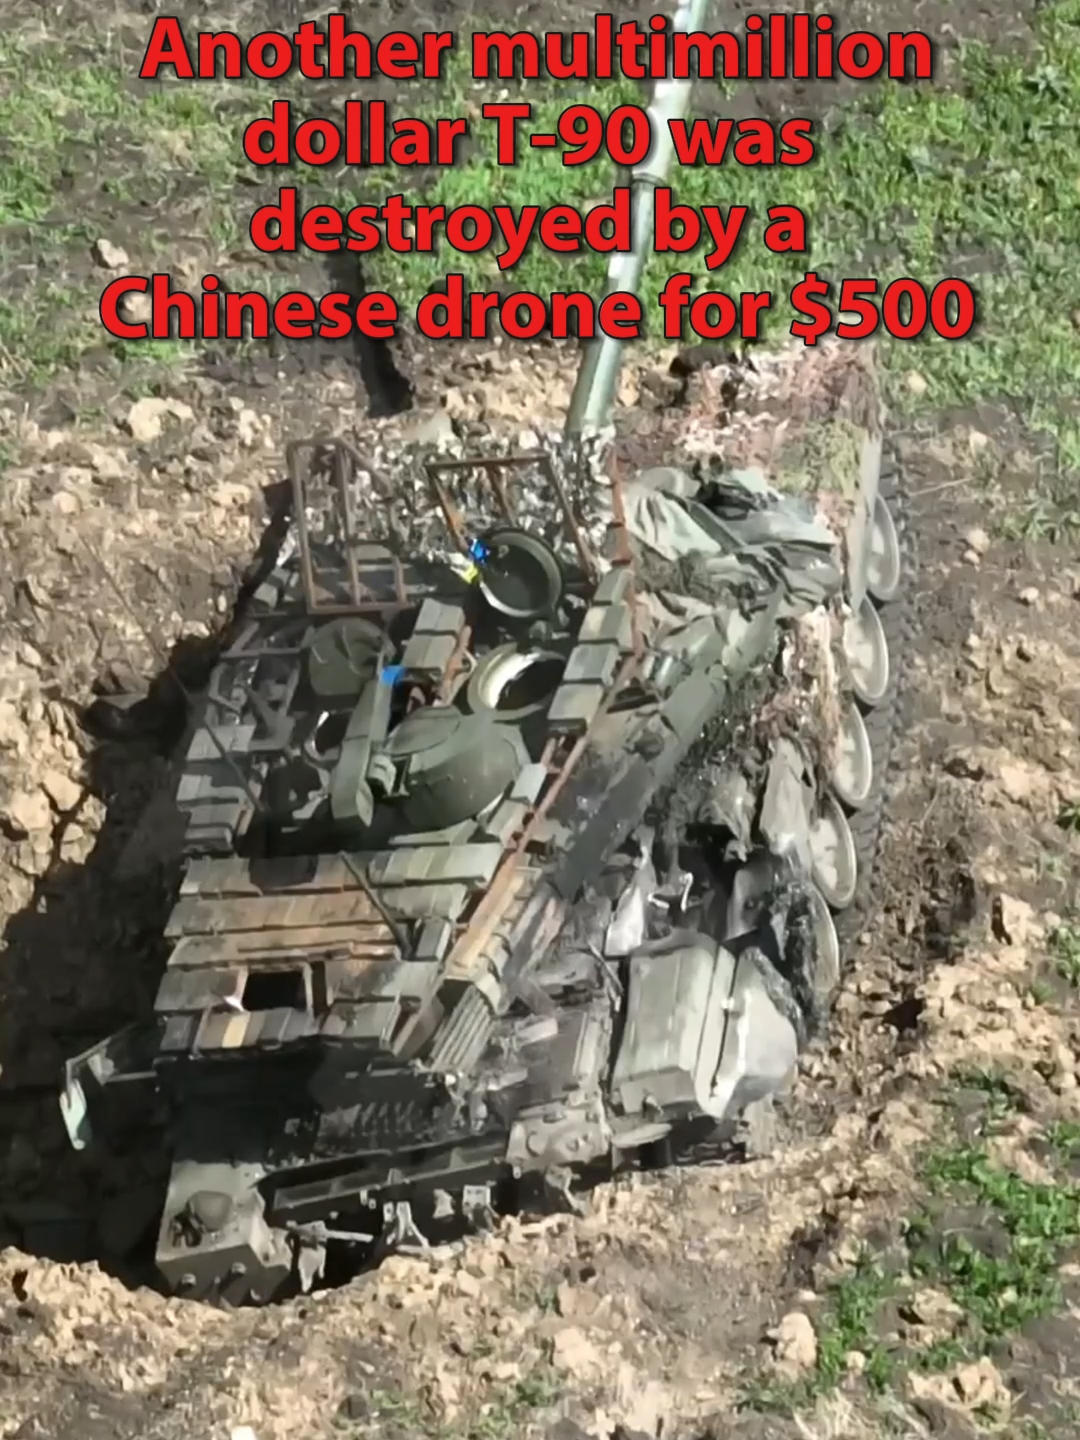 Another multimillion-dollar T-90 was destroyed by a Chinese drone for $500.